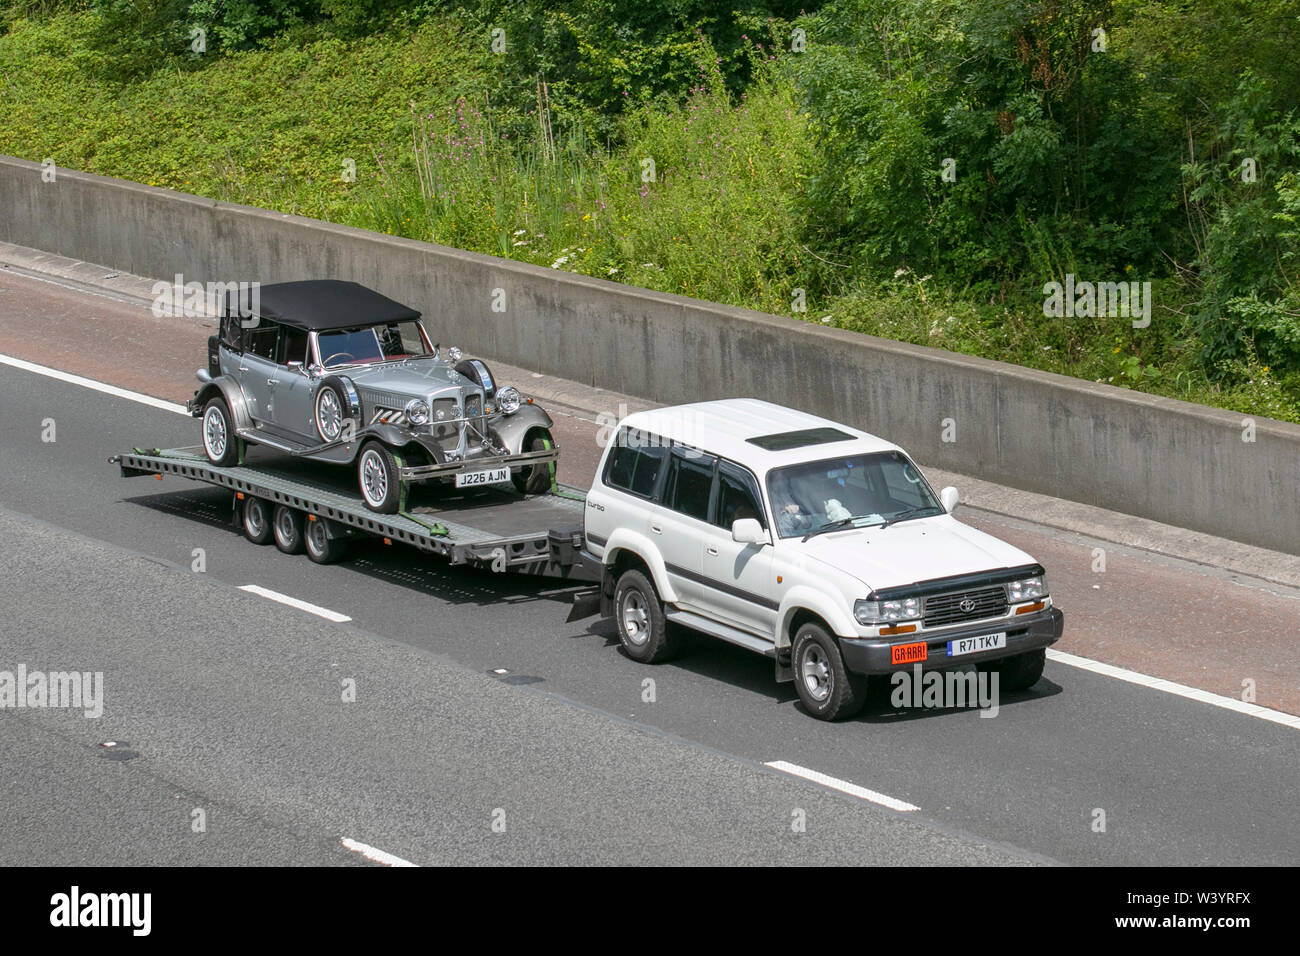 Landcruiser Toyota High Resolution Stock Photography and Images - Alamy